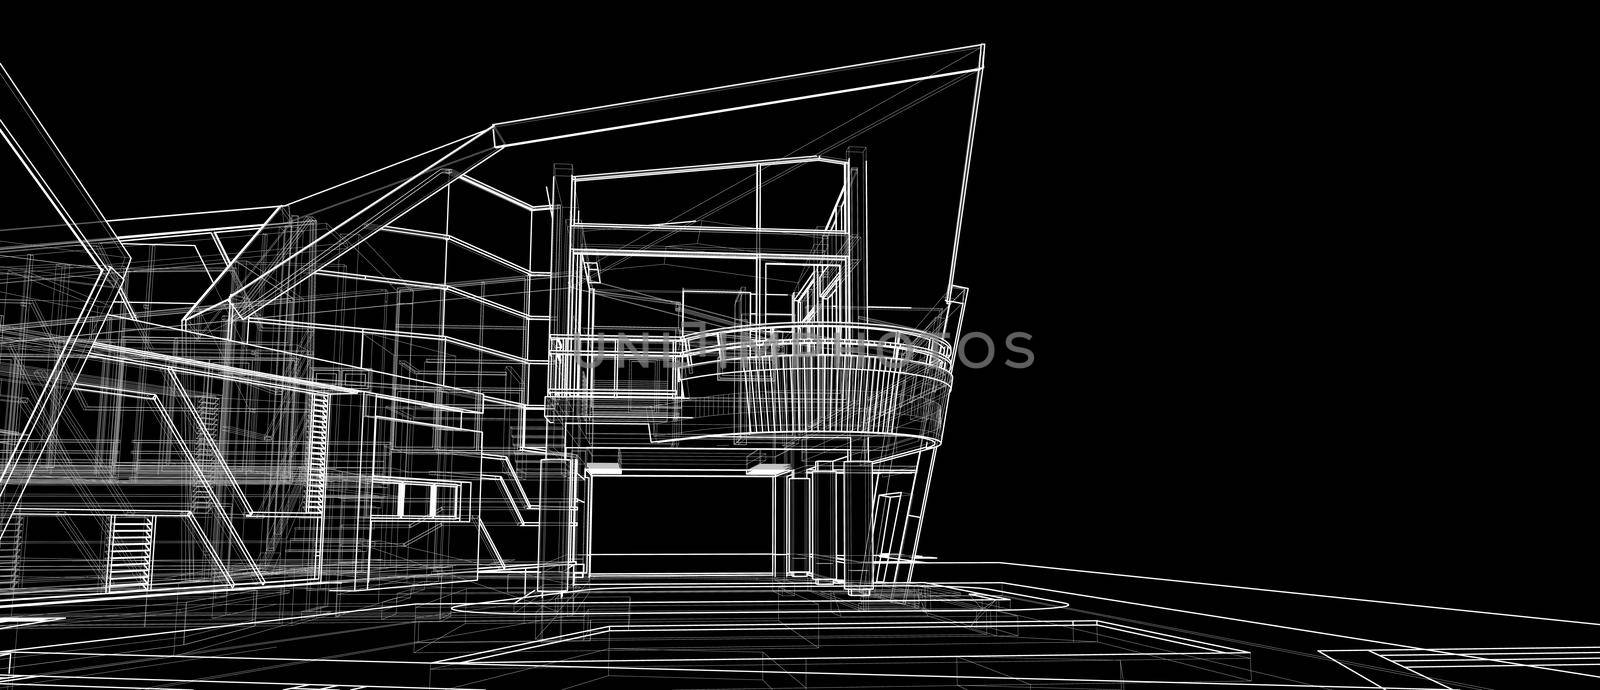 Architecture exterior facade design concept 3d perspective white wireframe rendering black background. For abstract background or wallpaper destops architecture theme interior space